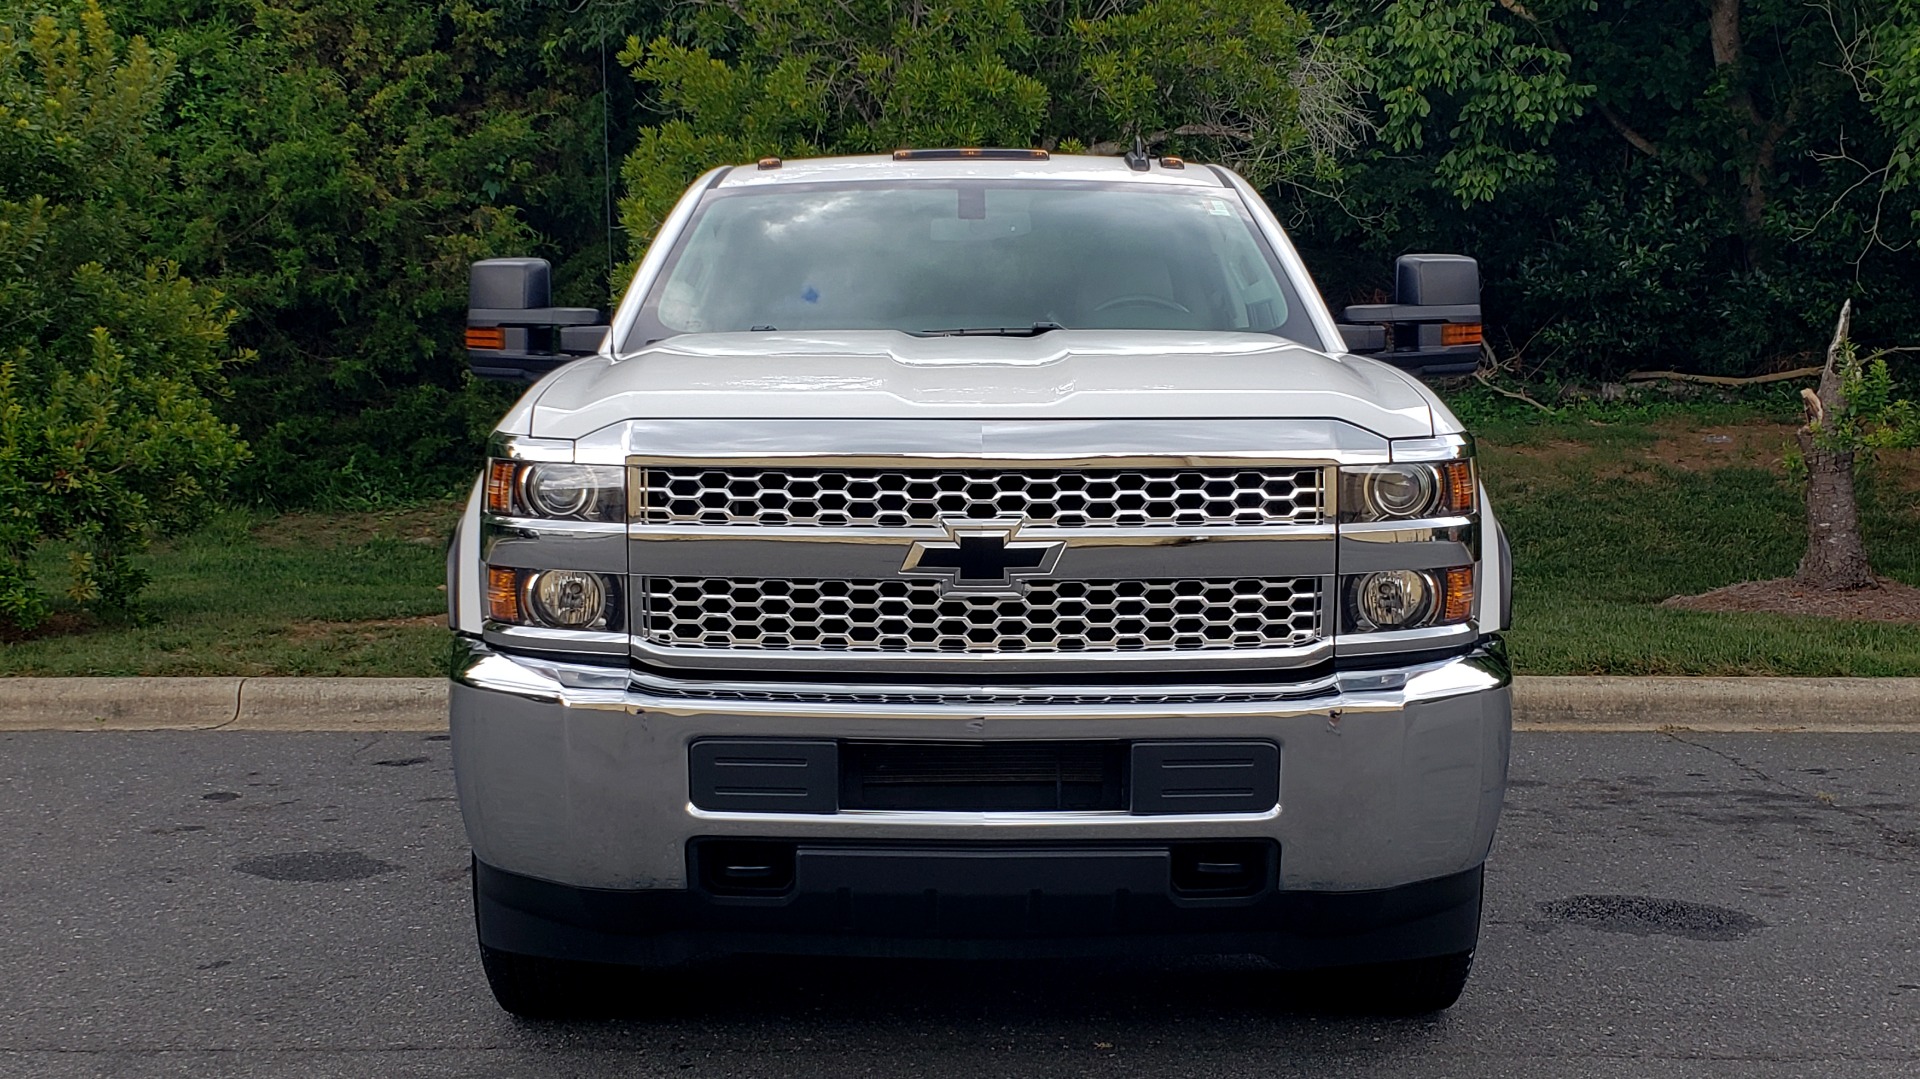 Used 2019 Chevrolet SILVERADO 2500HD WORK TRUCK / CREW CAB / 6.0L V8 / 4WD / BEDLINER for sale Sold at Formula Imports in Charlotte NC 28227 18